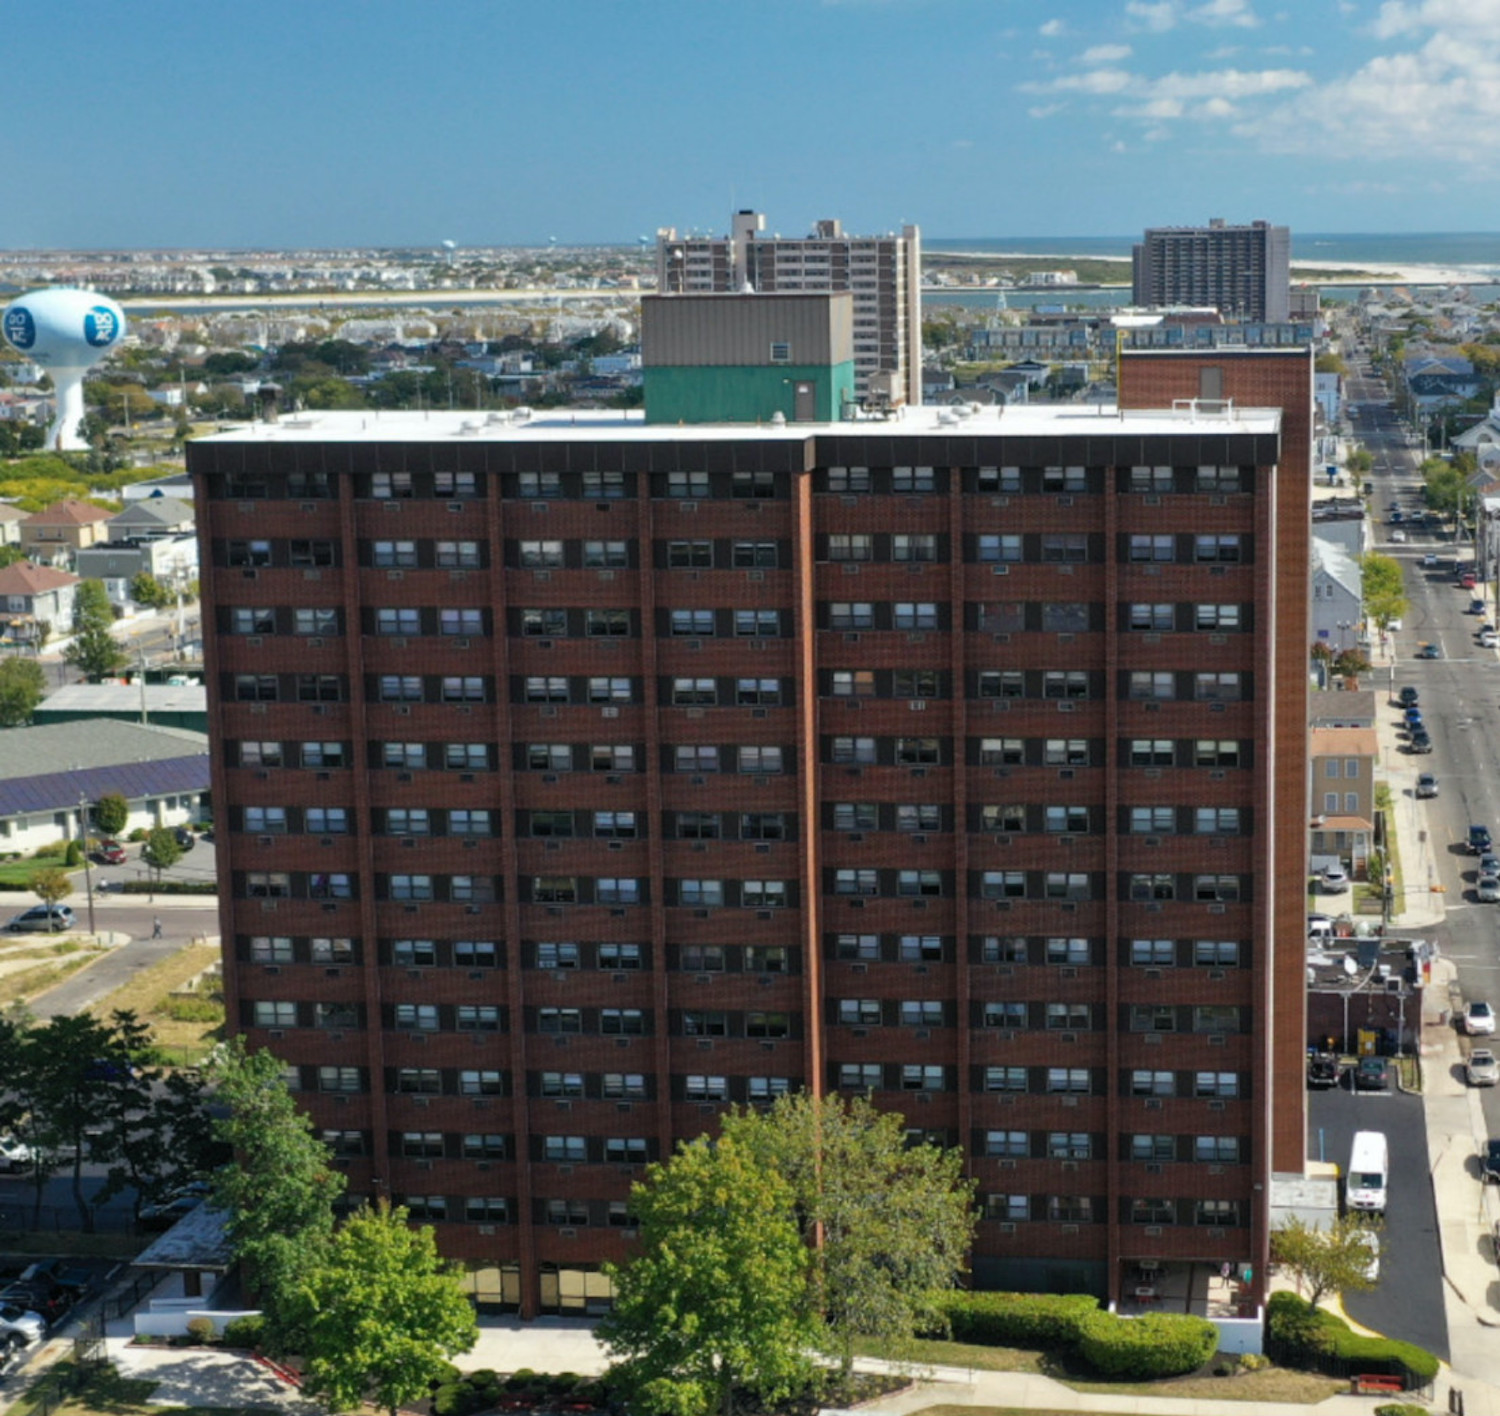 Baltic Plaza Apartments, courtesy of Standard Communities